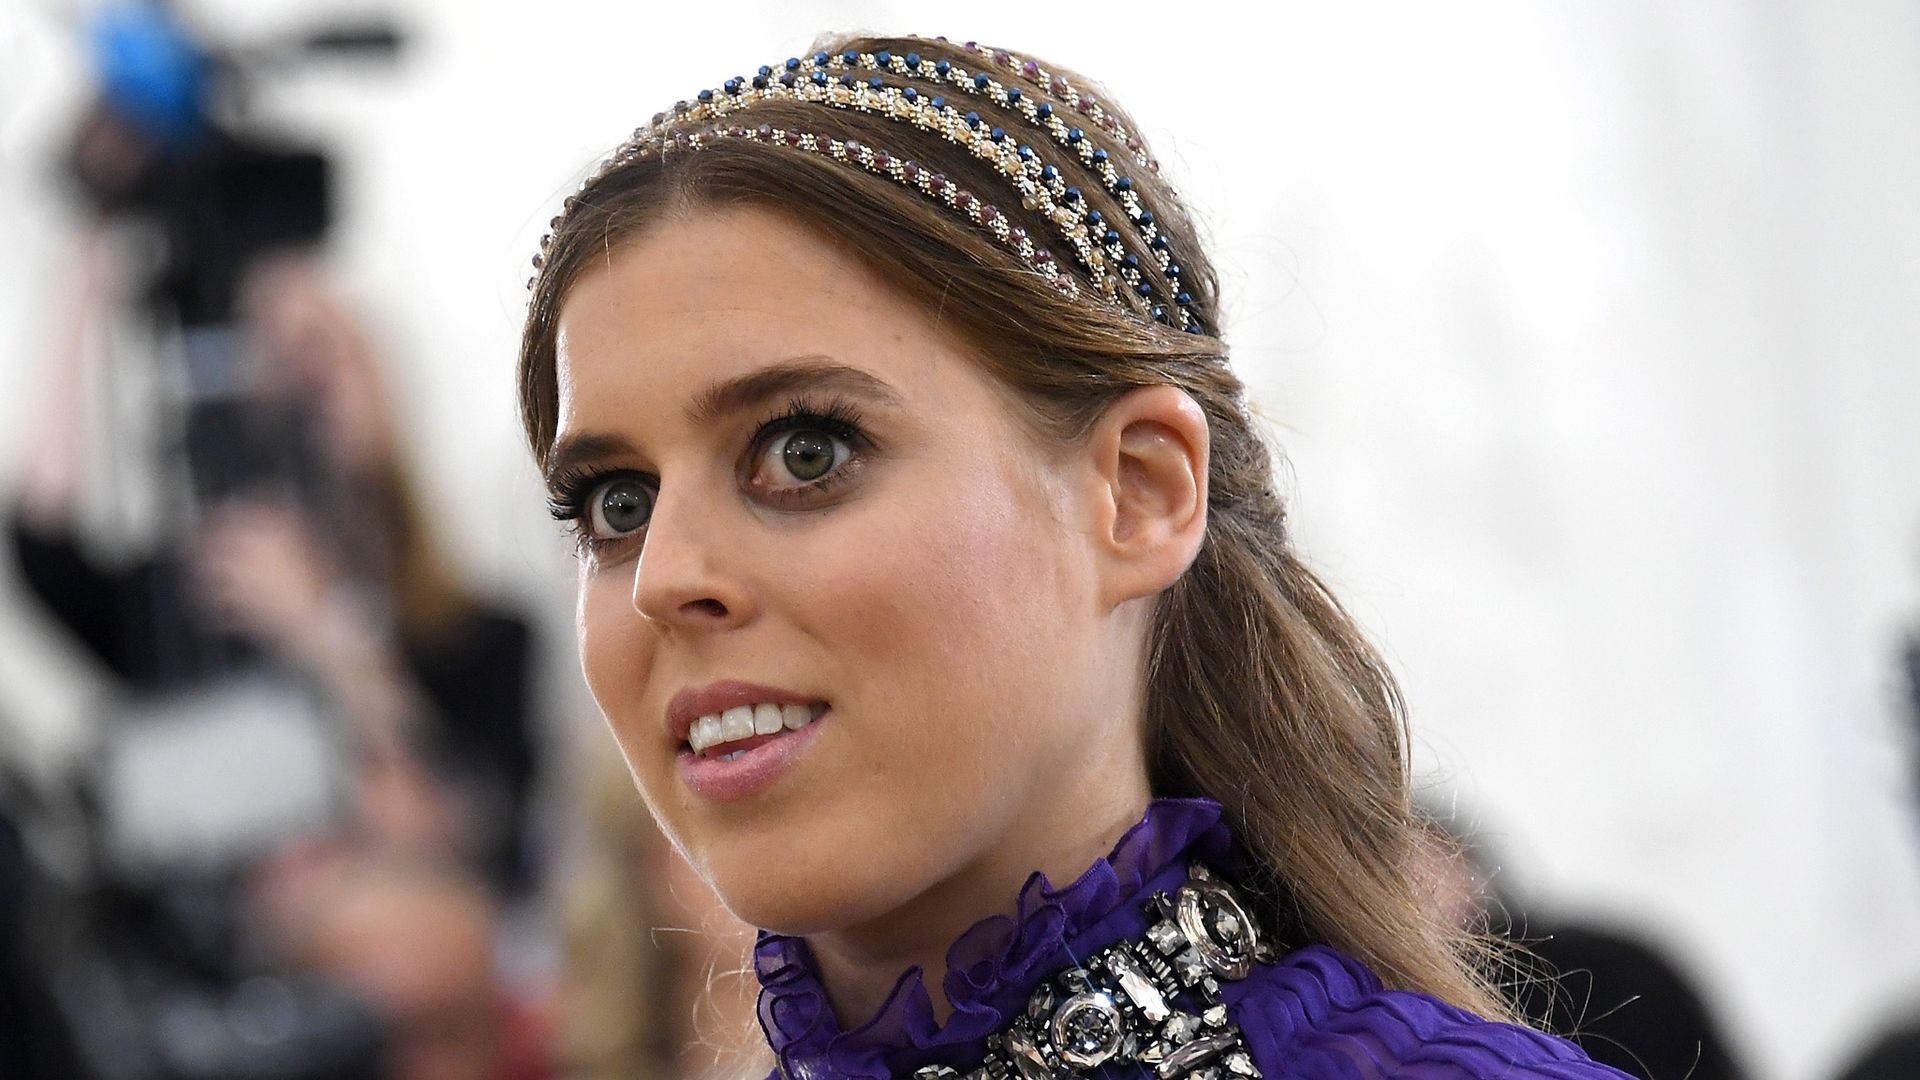 Princess Beatrice launched this royal fashion trend at the Met Gala